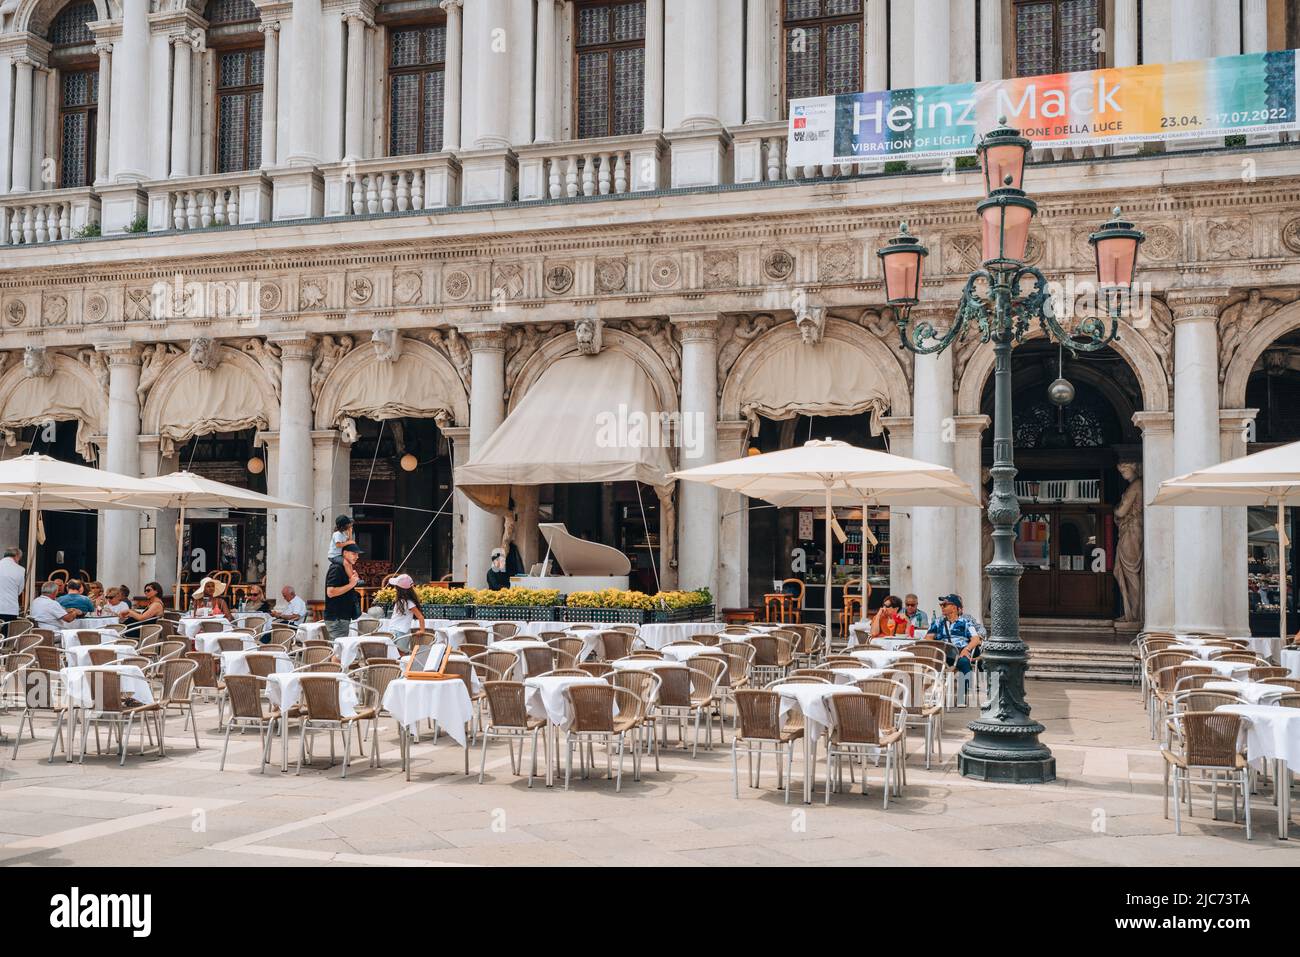 Venice, Italy - May 21, 2022: People at the outdoor tables of Caffe Chioggia in Piazetta San Marco, extension of San Marco square in Venice, capital o Stock Photo